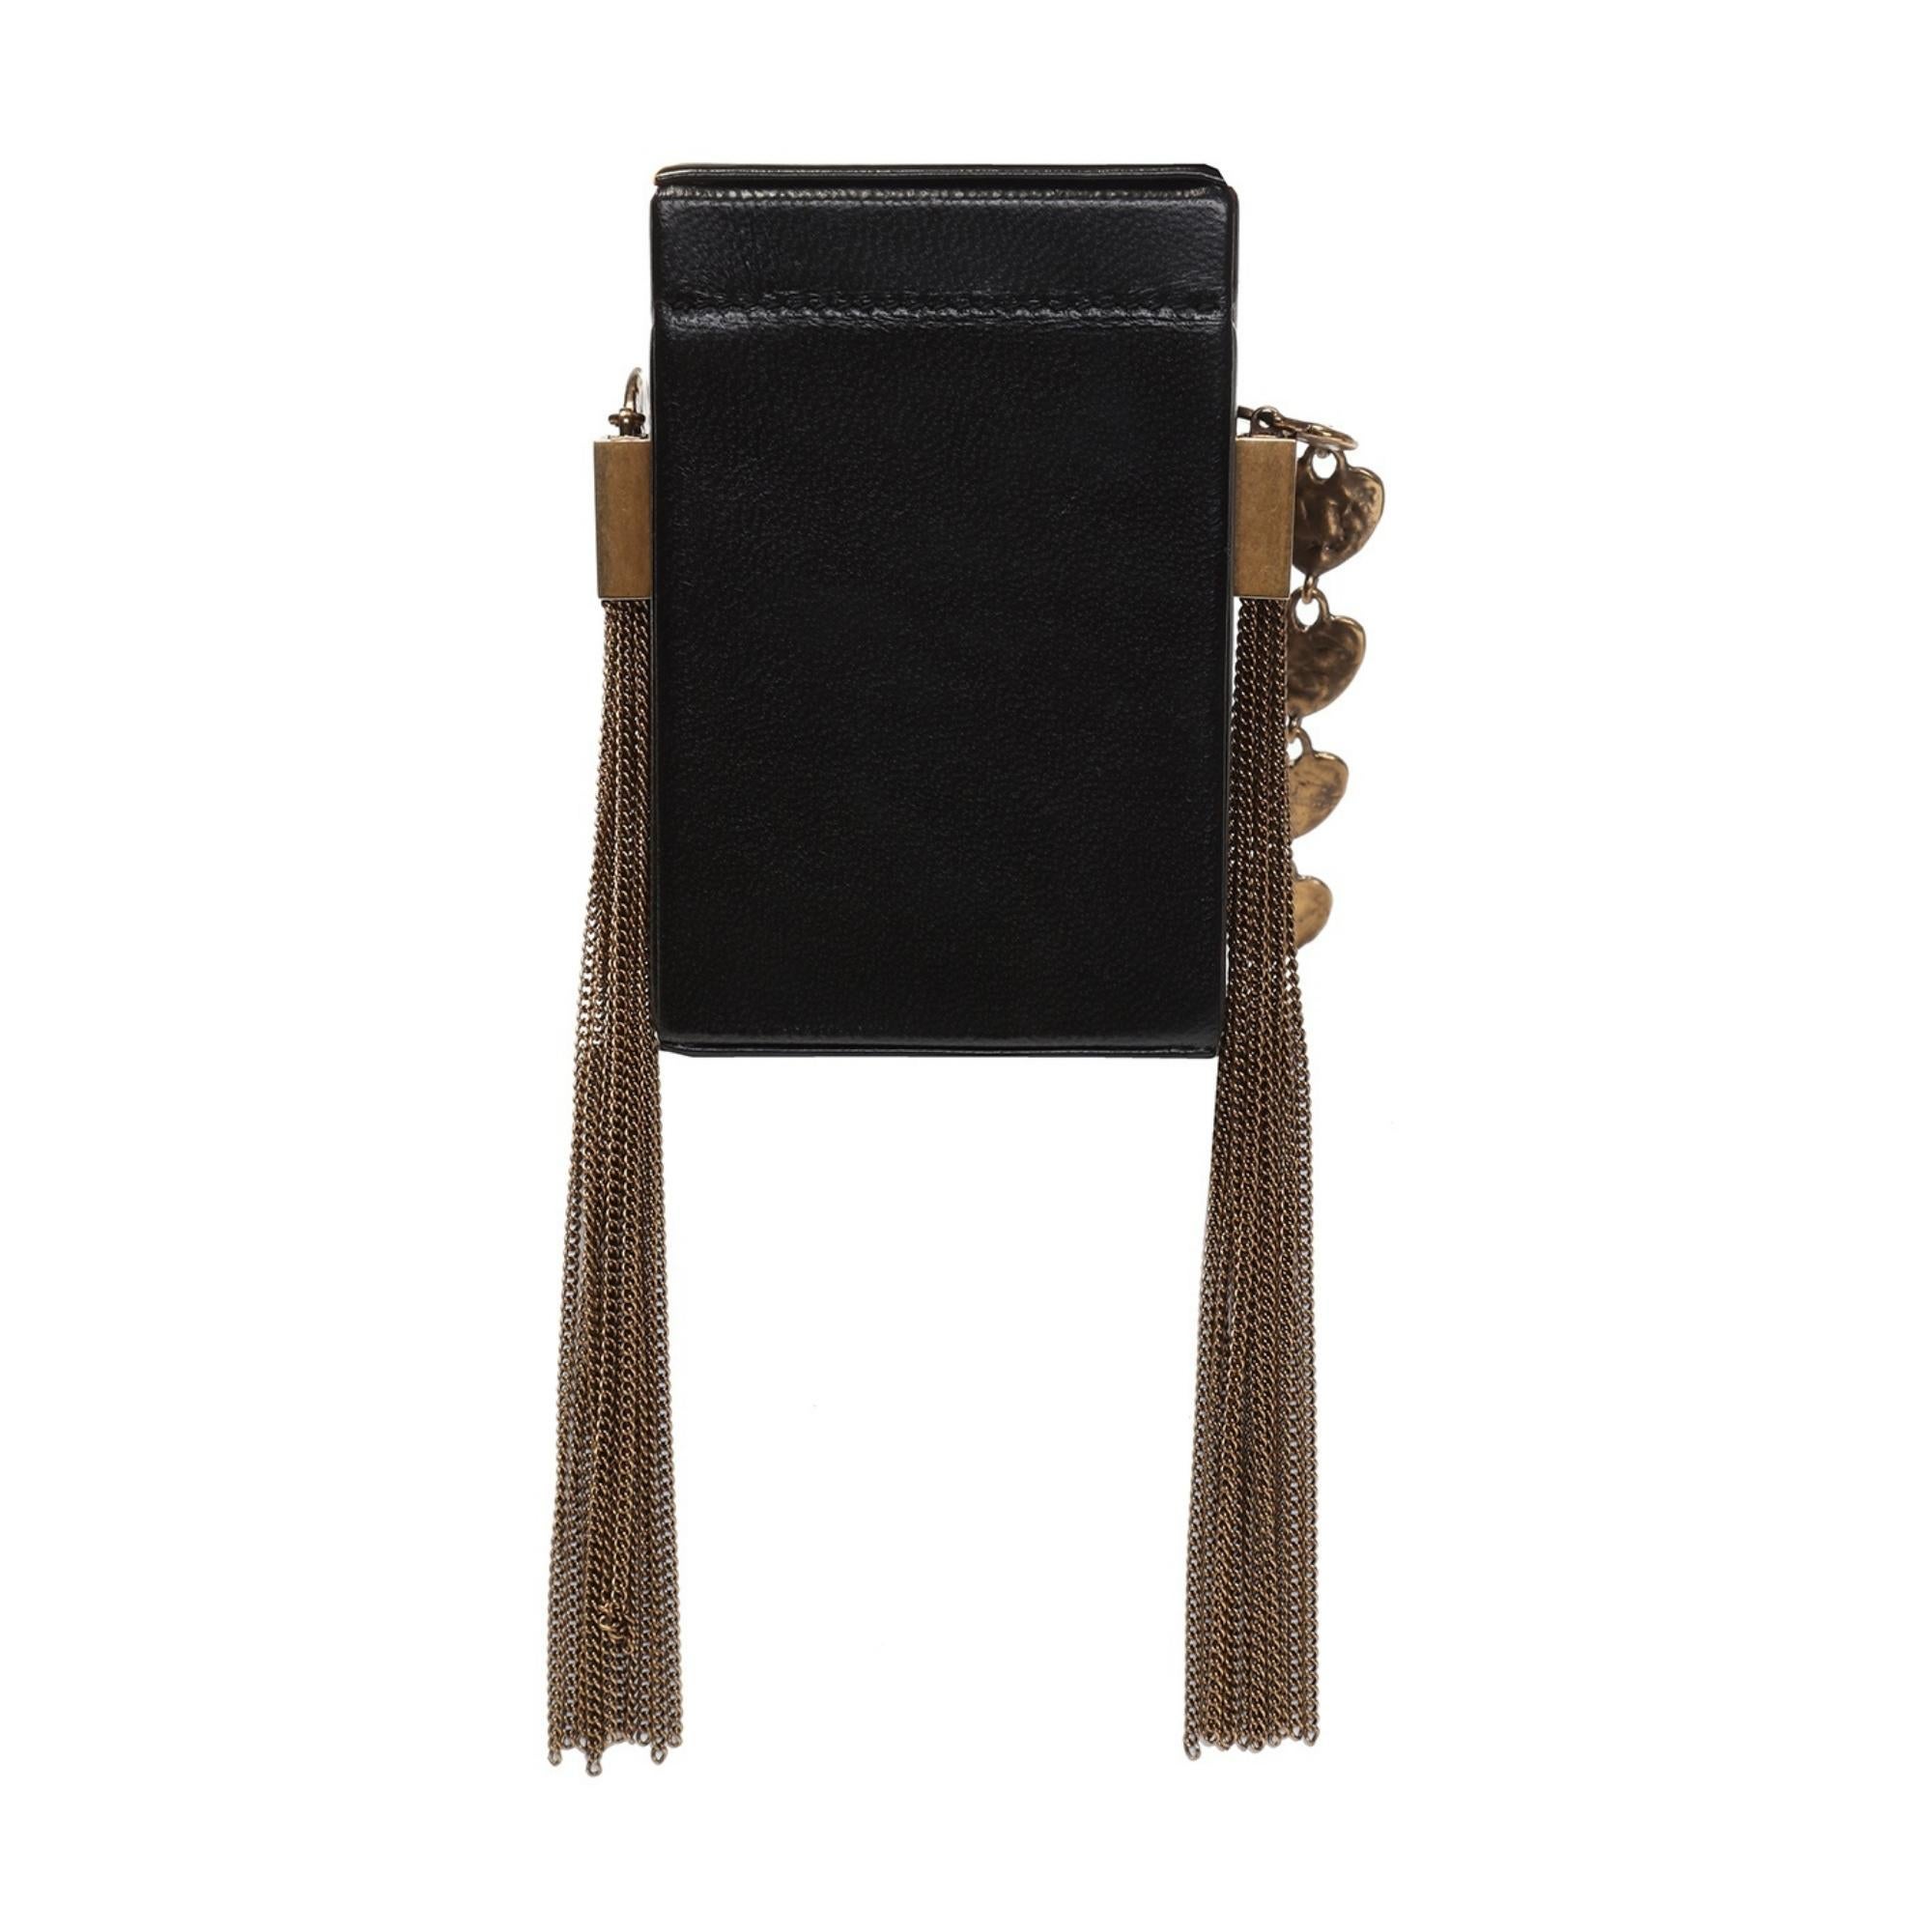 Black cigarette case from Saint Laurent. Made of leather. Gold-tone logo embossed on the front. Decorative fringes on the side. Chain shoulder strap featuring a heart motif. Antiqued gold-tone metal hardware.

COLOR: Black with aged gold tone